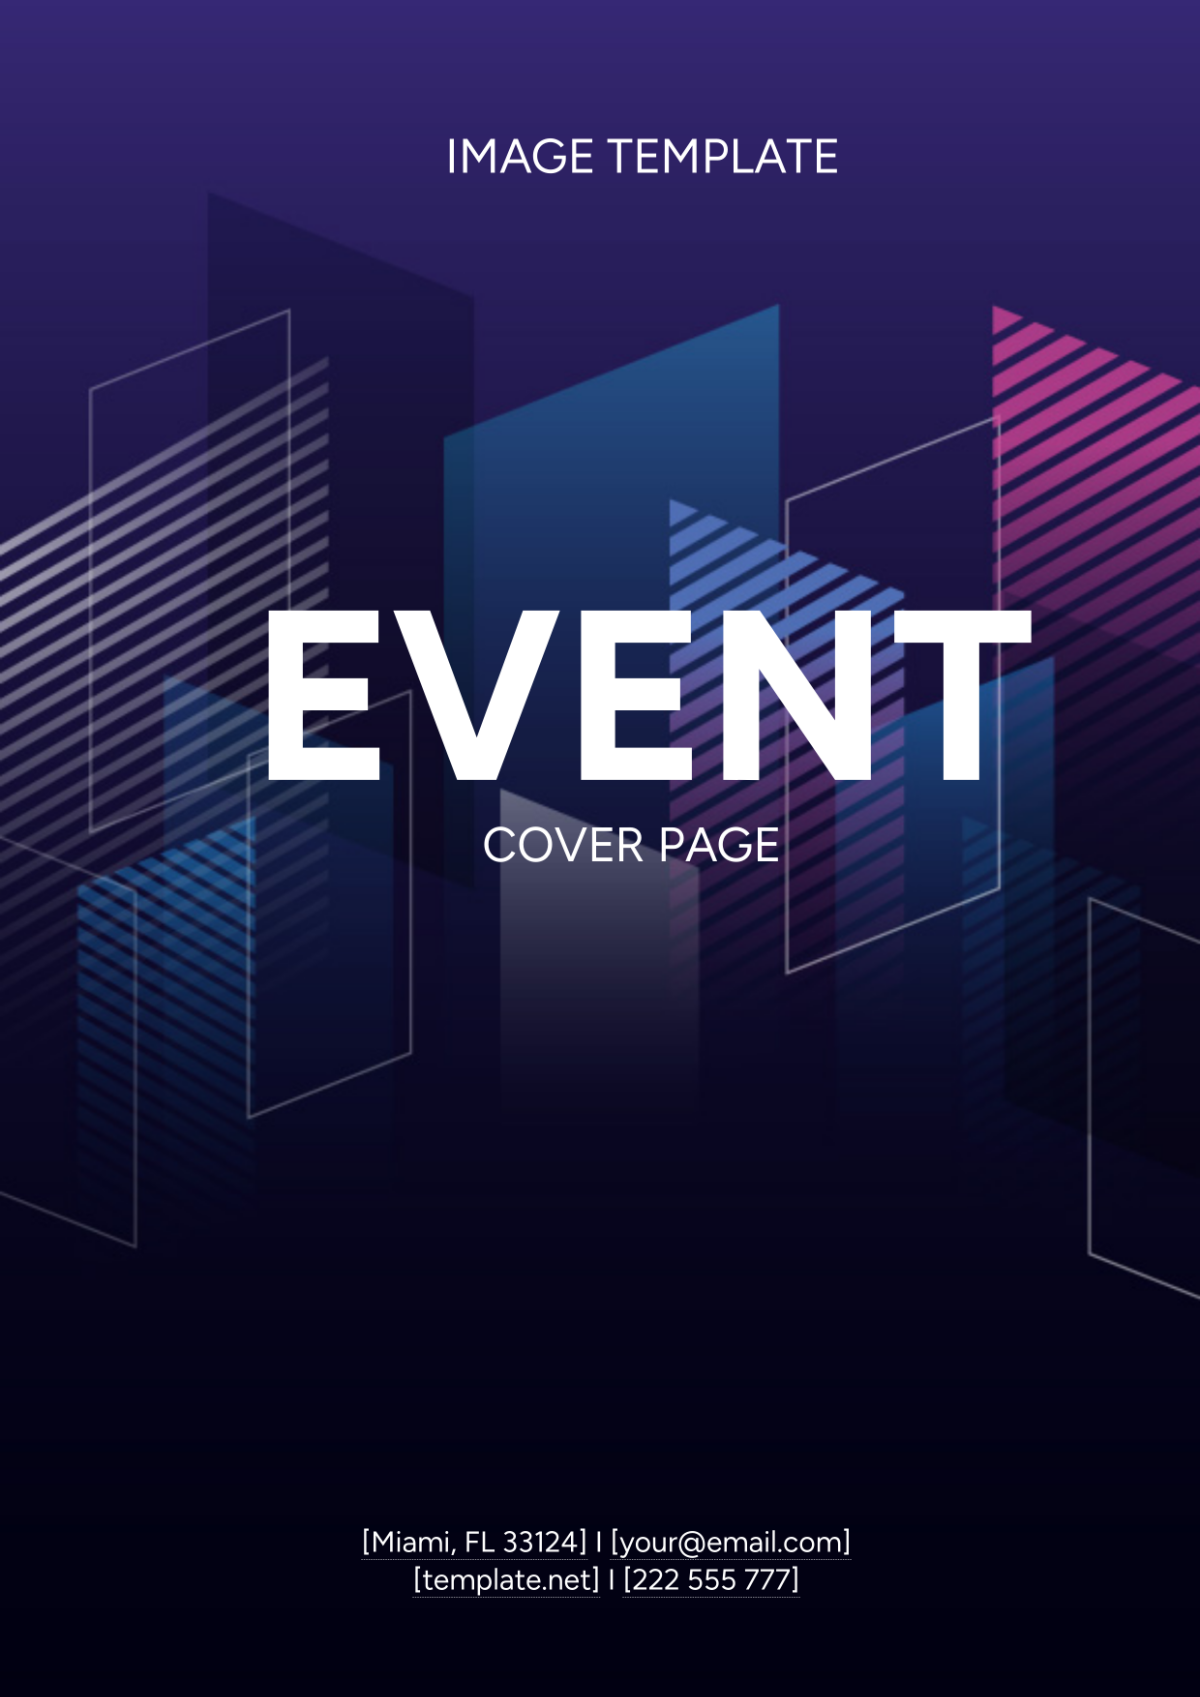 Event Cover Page Image